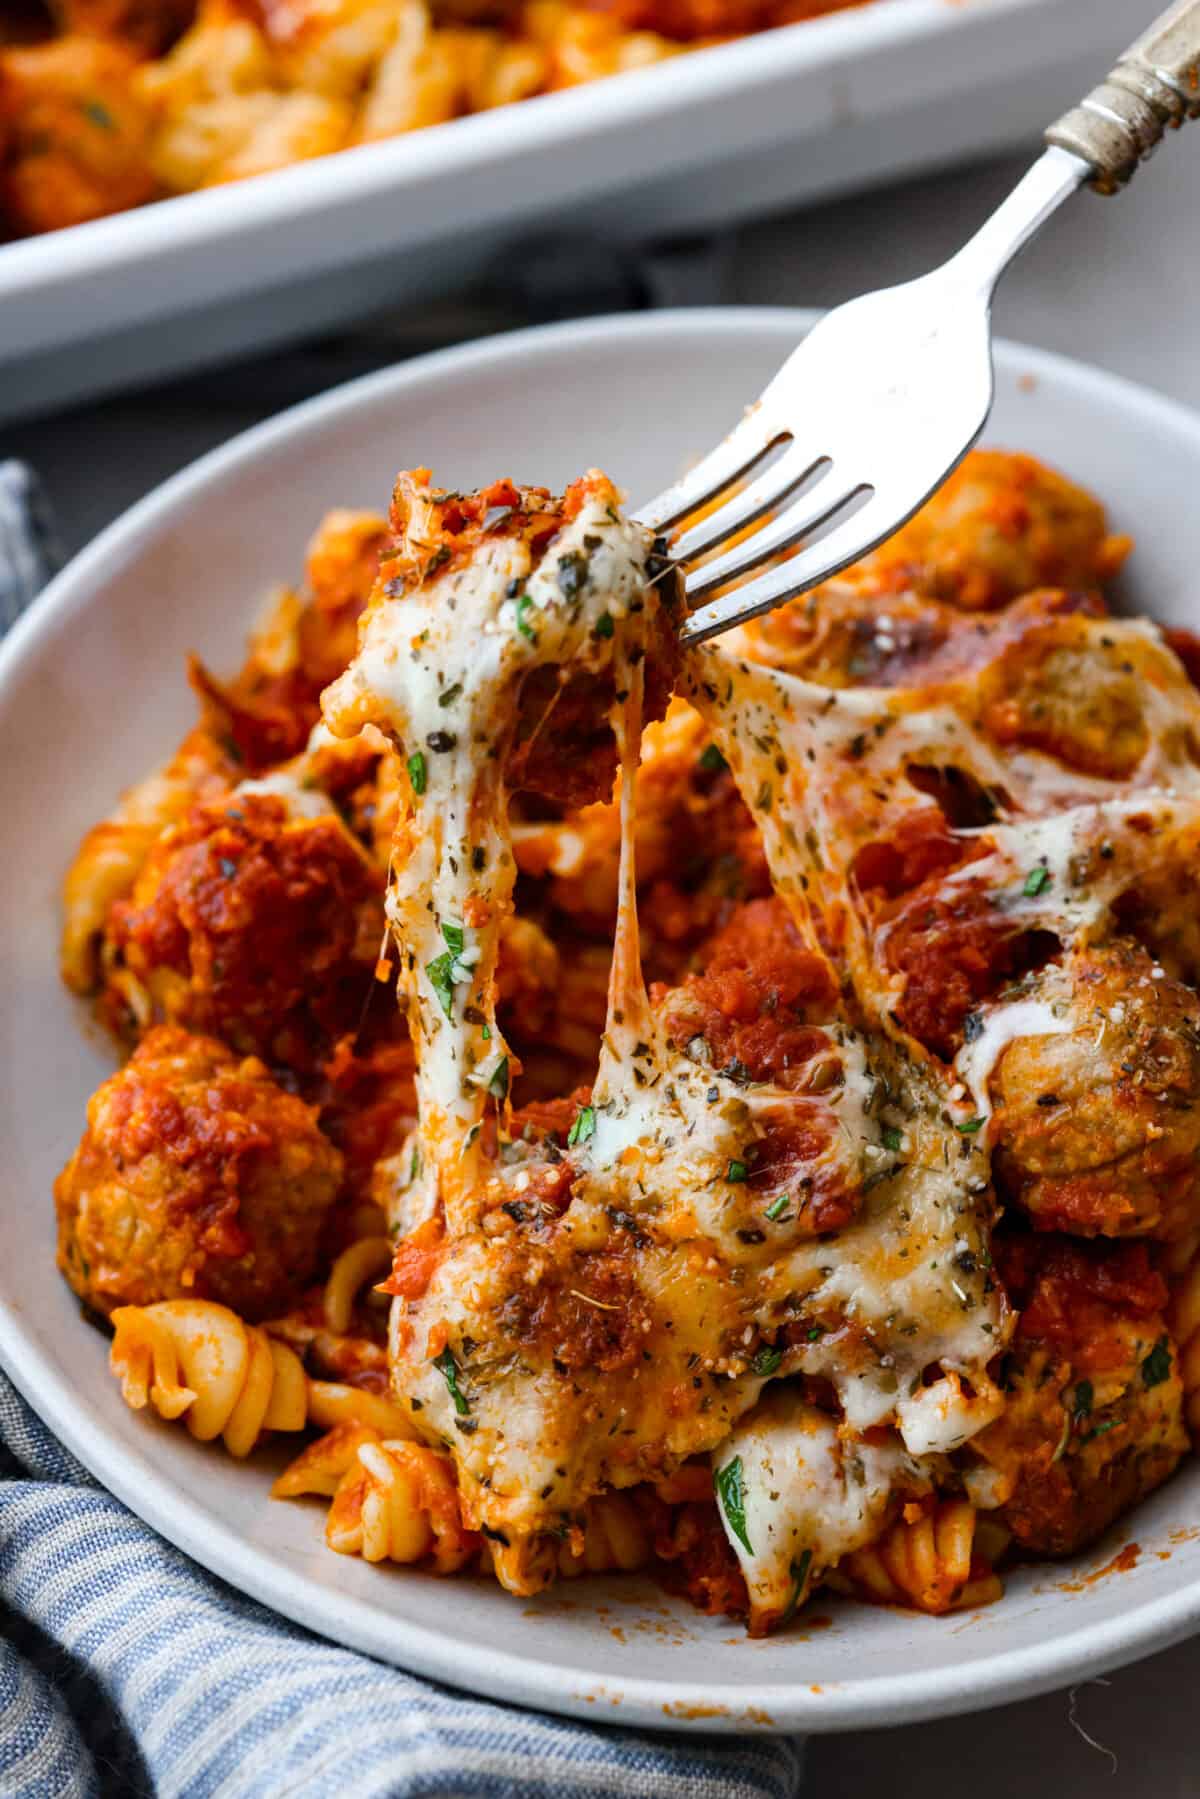 Picking up a cheesy meatball with a fork.